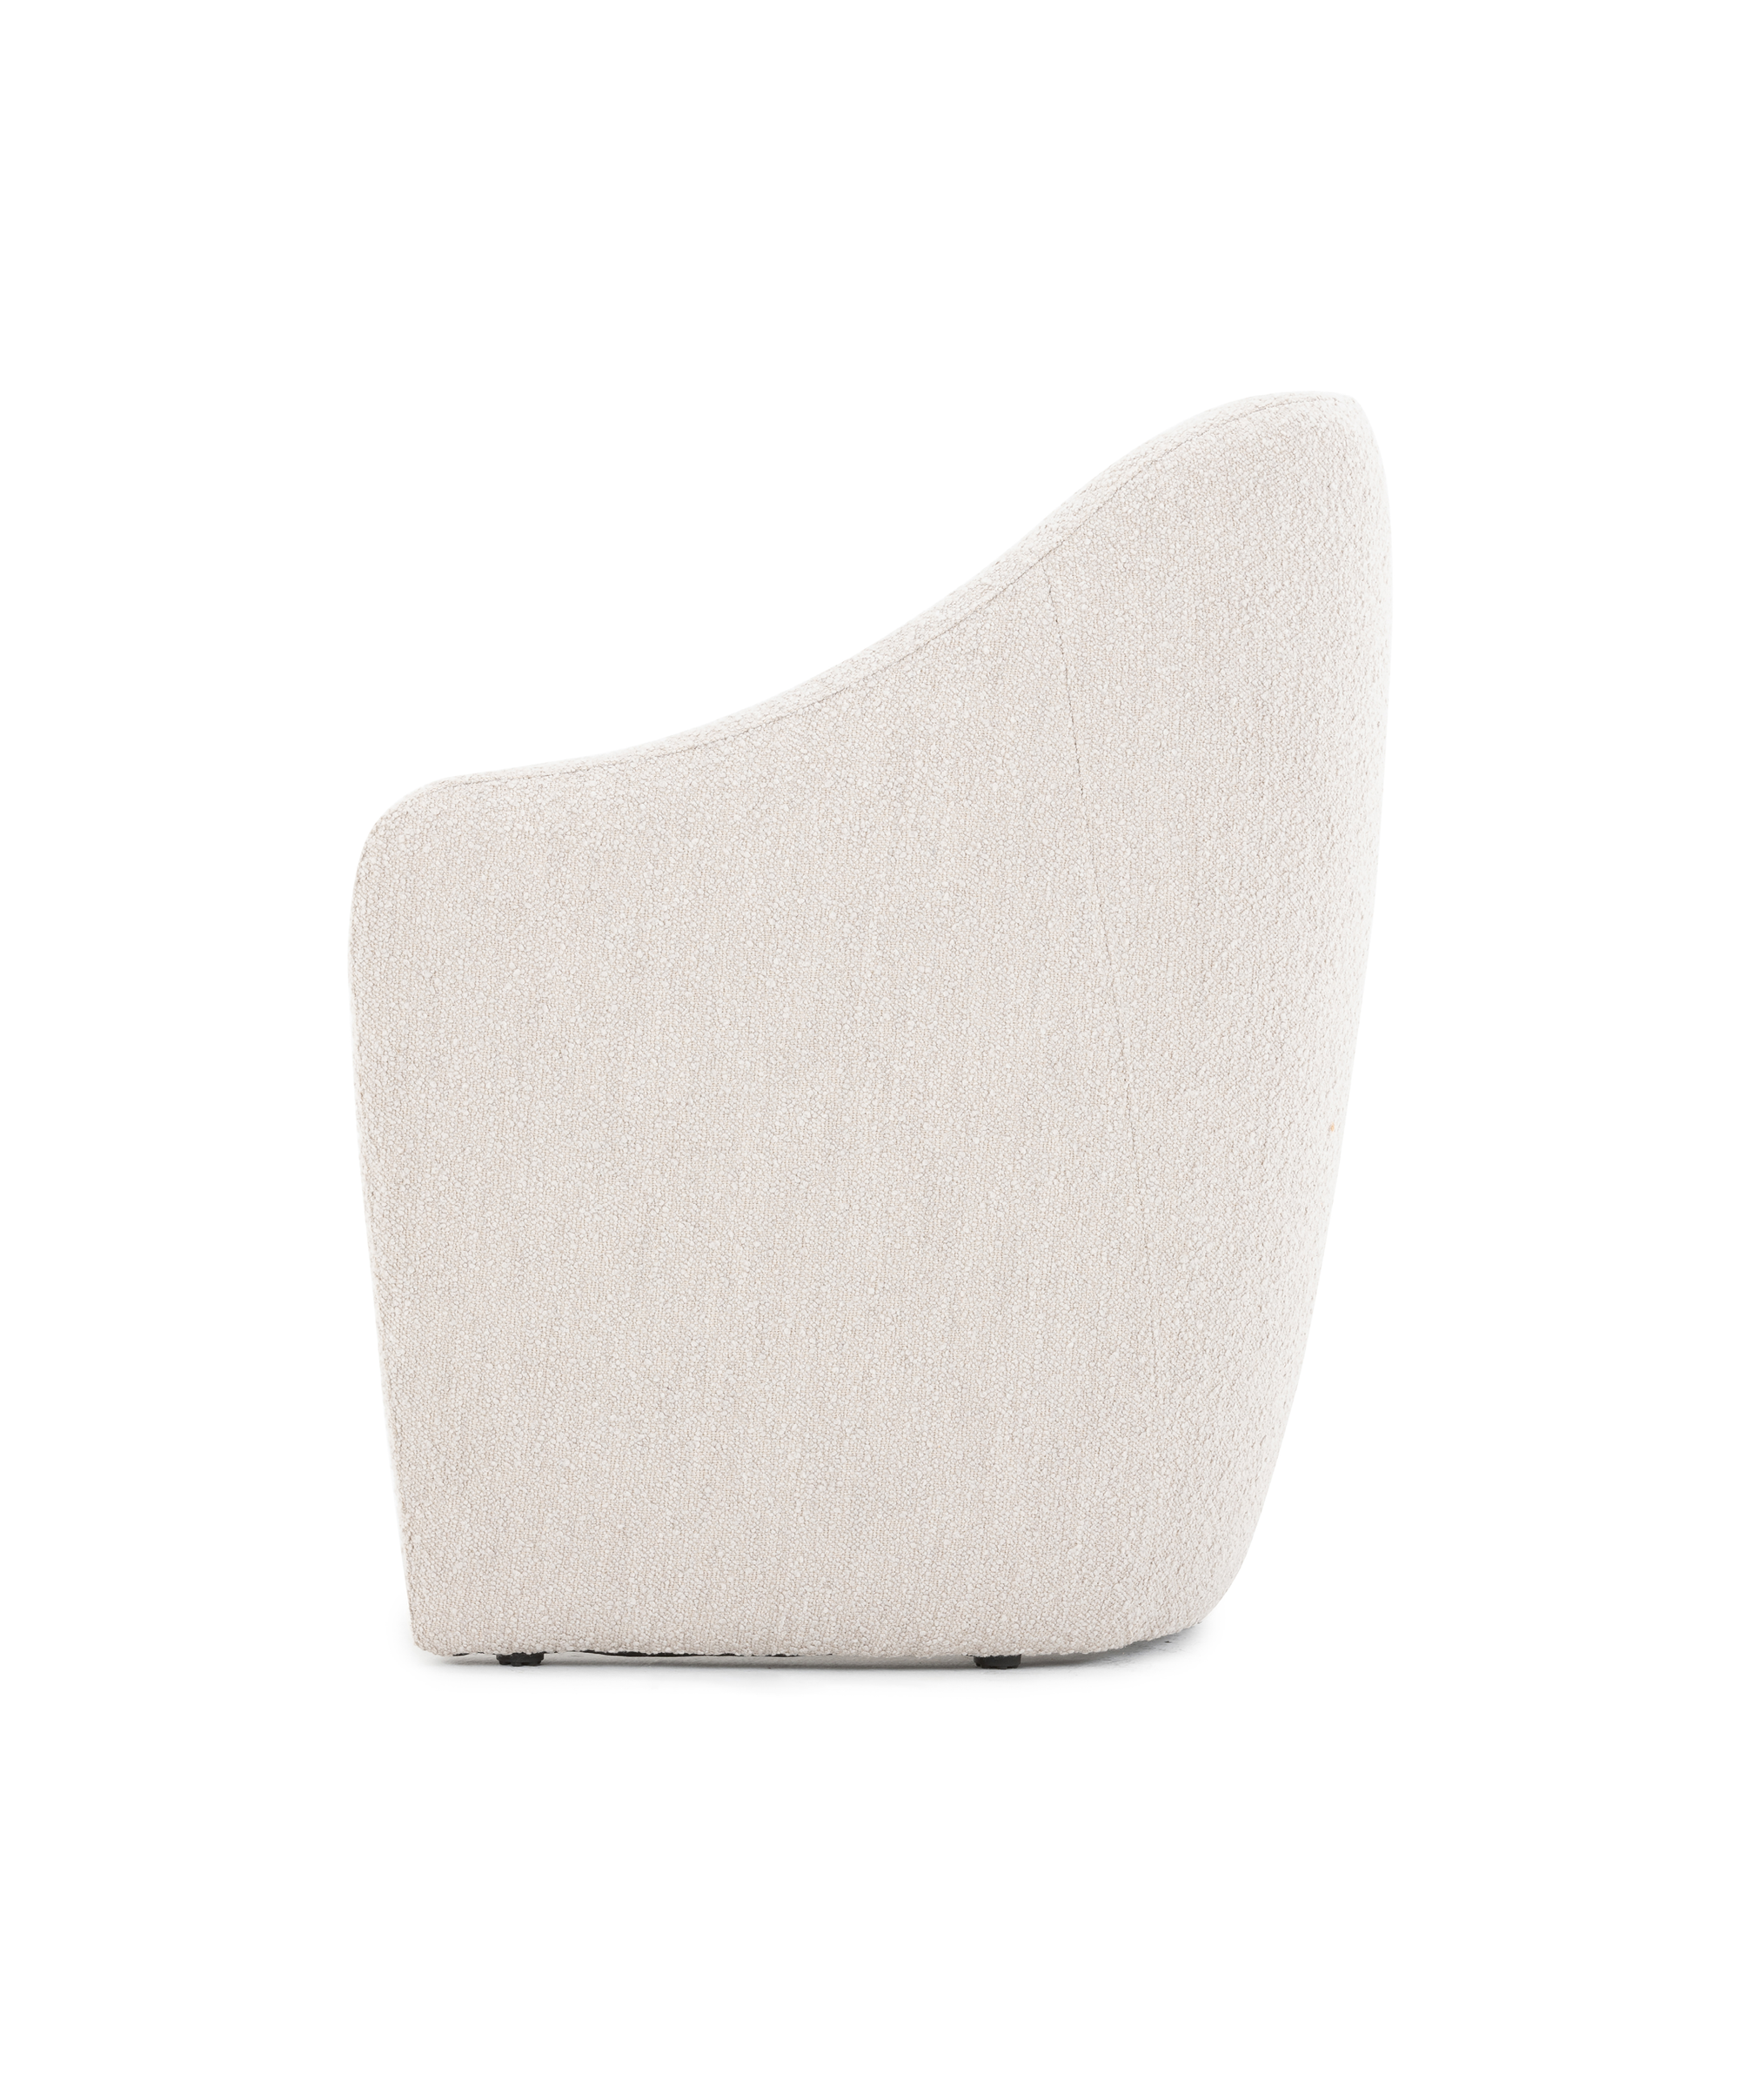 Mira Dining Room Chair